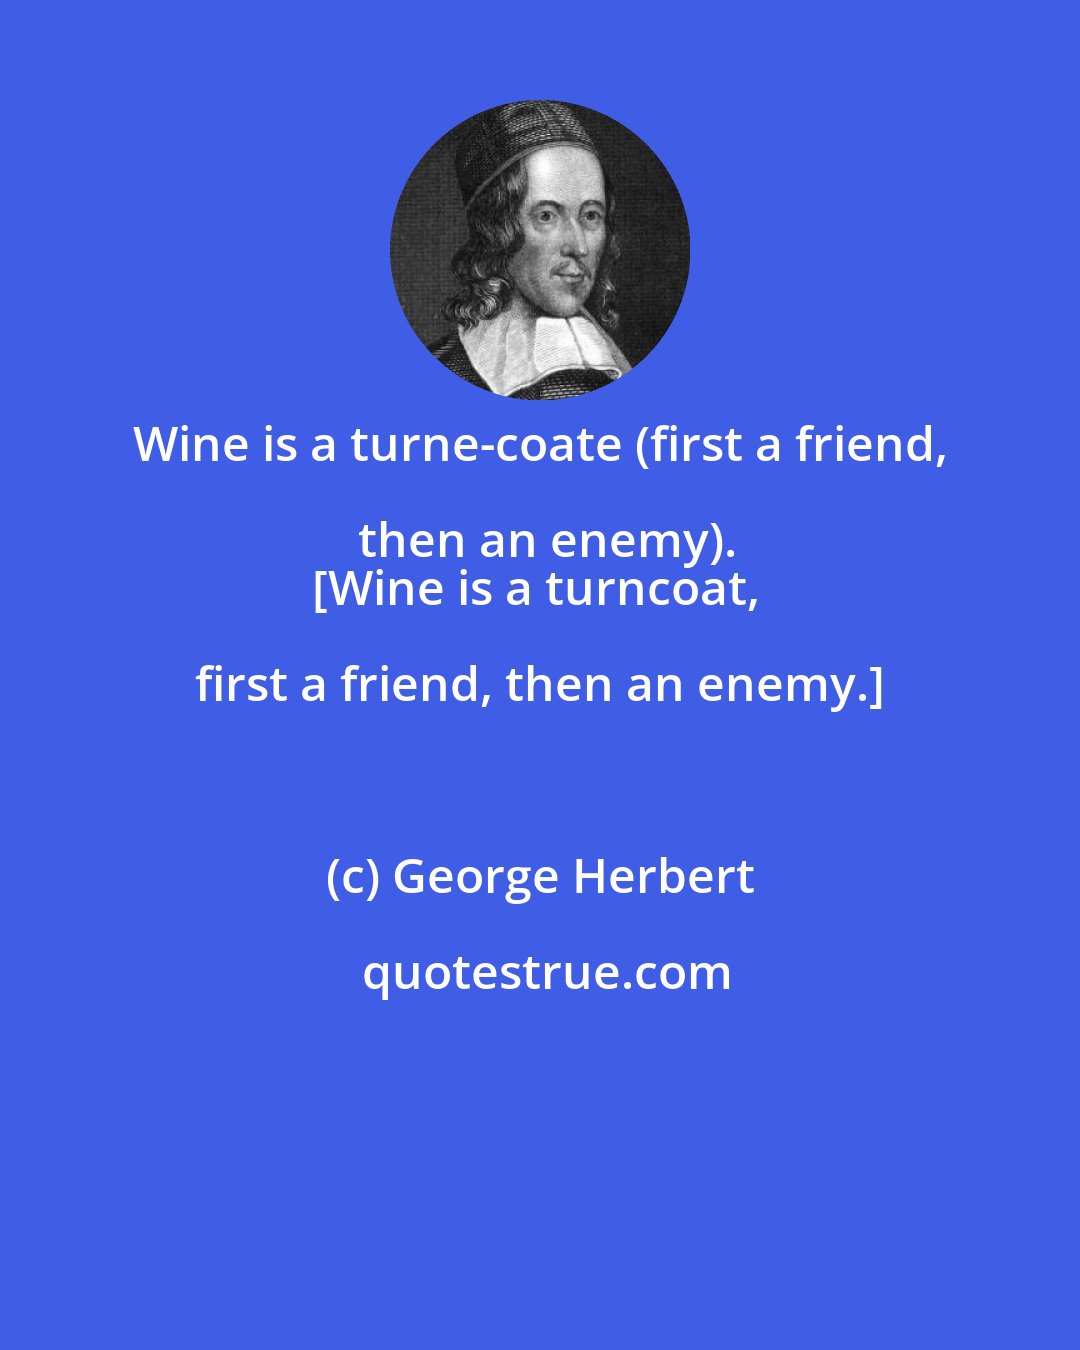 George Herbert: Wine is a turne-coate (first a friend, then an enemy).
[Wine is a turncoat, first a friend, then an enemy.]